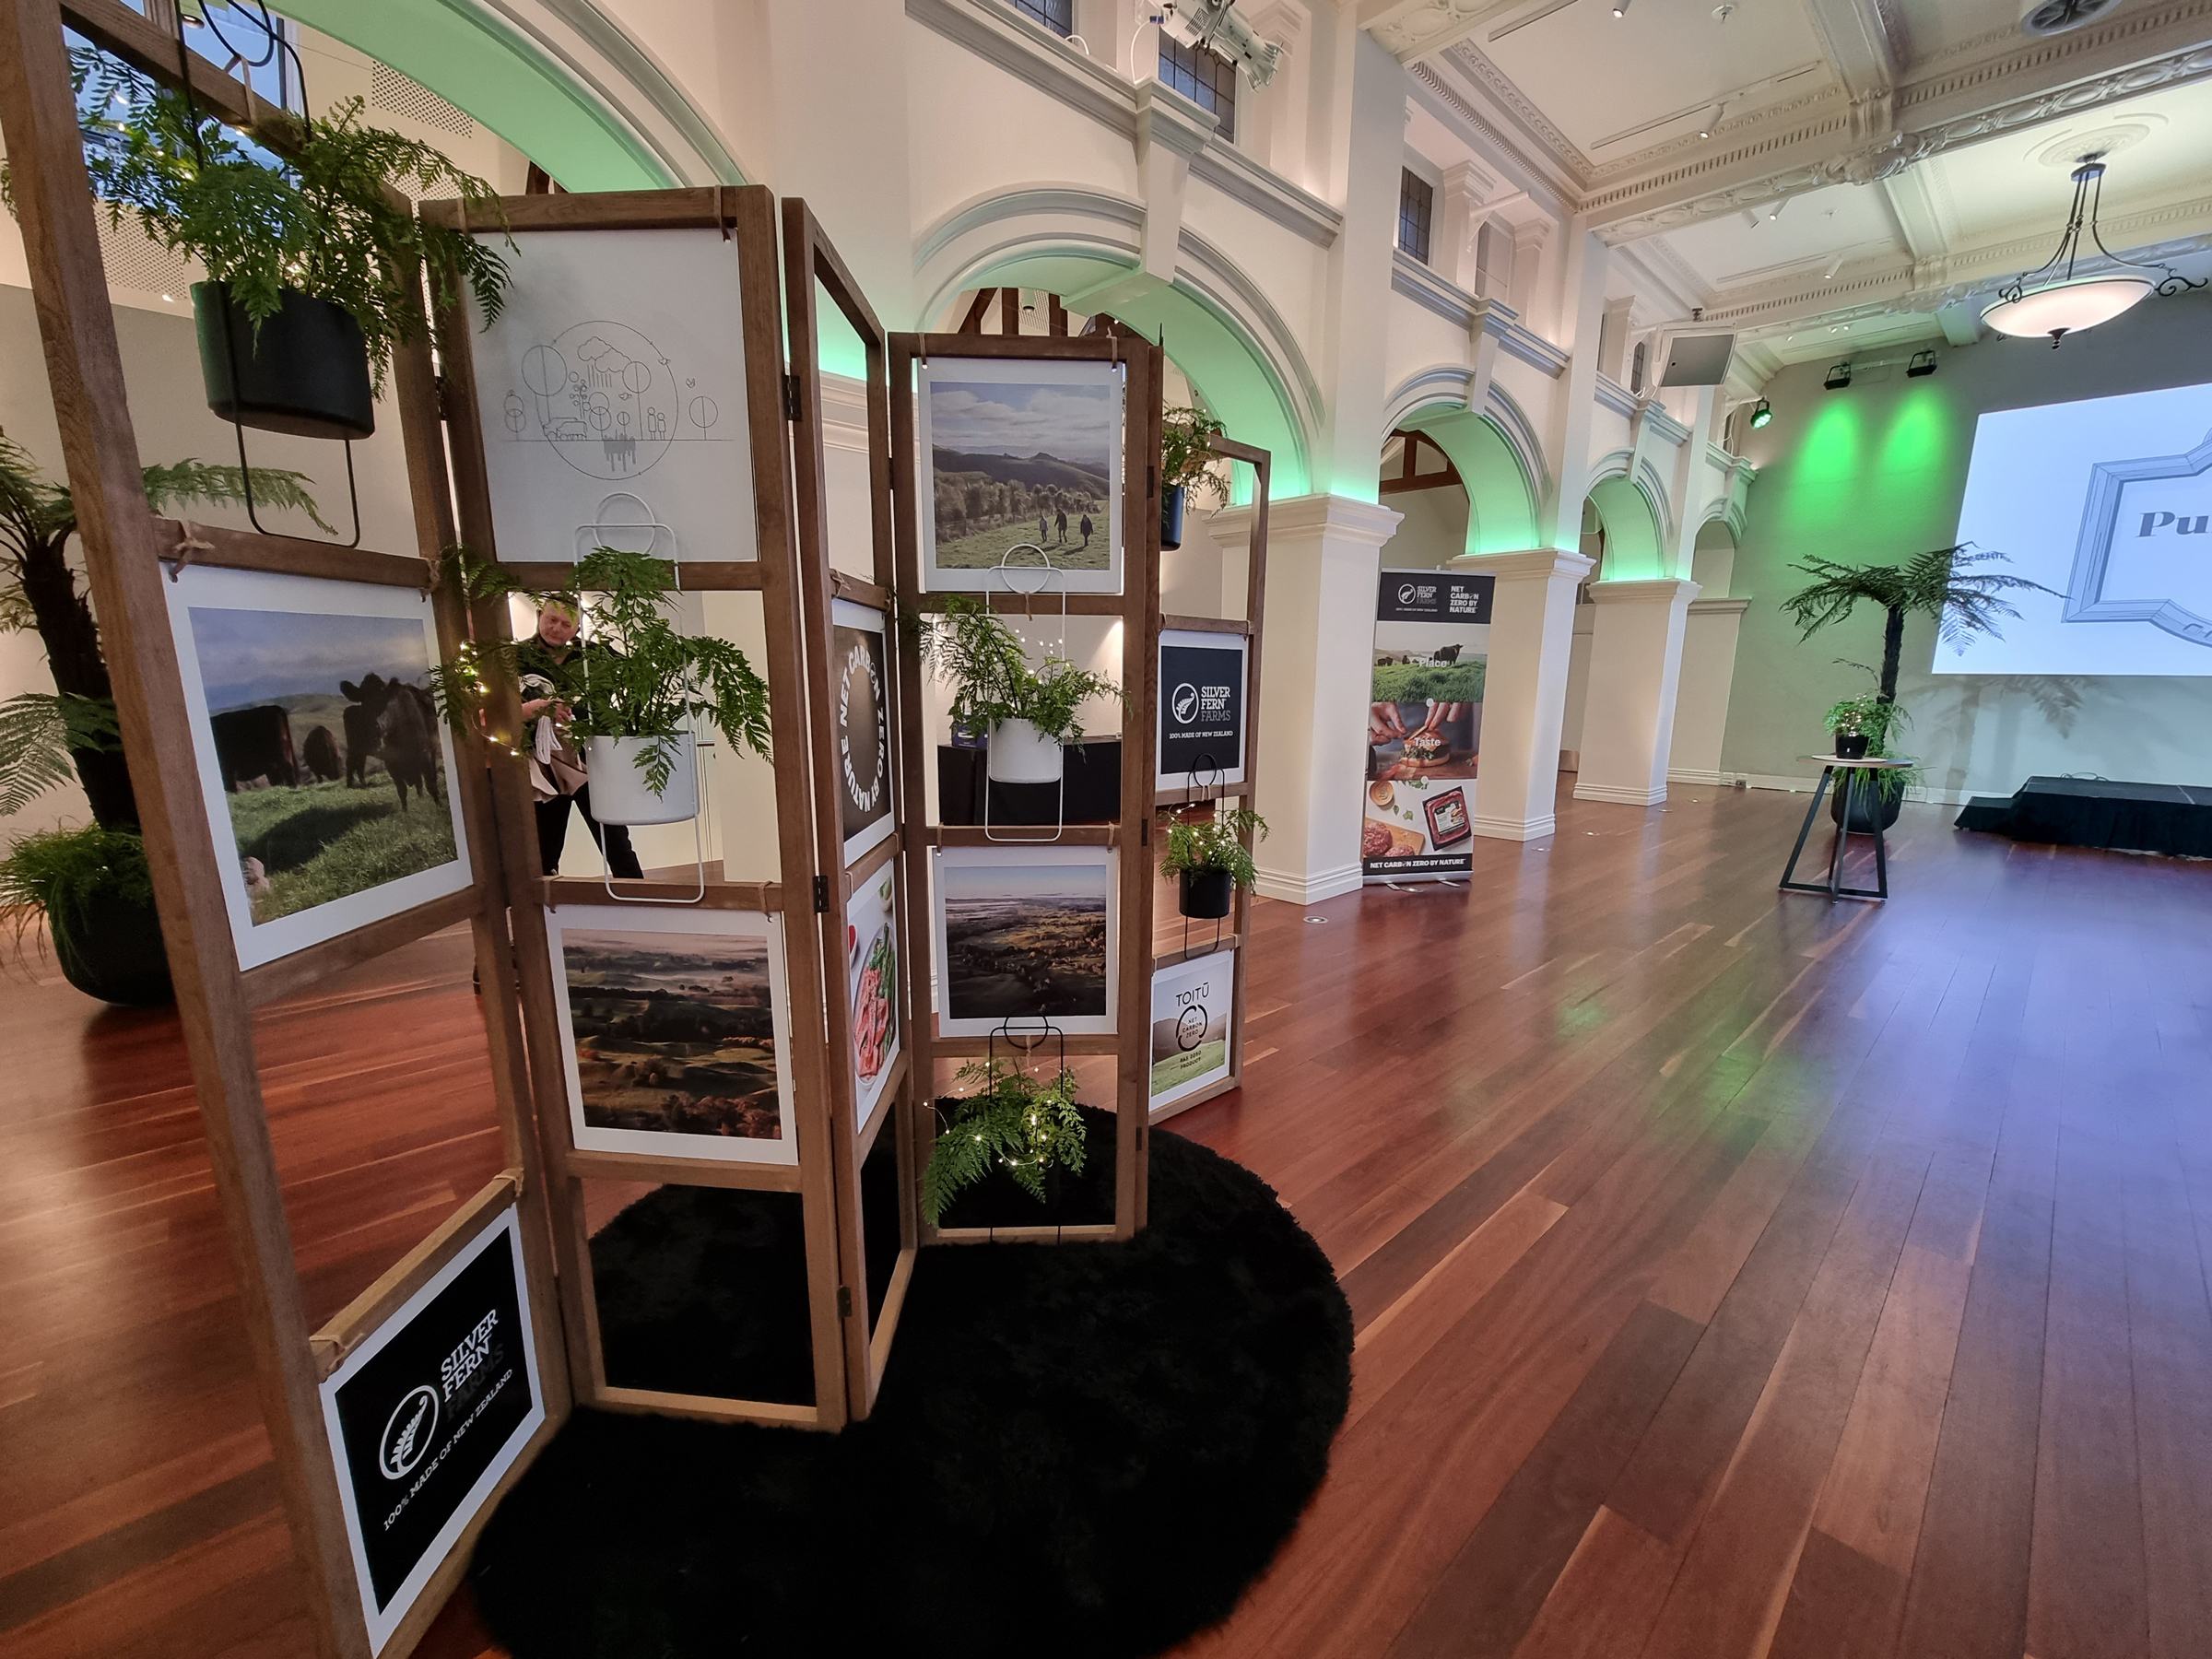 Product Launches ... Silver Fern Farms Carbon Zero Product Launch 2022